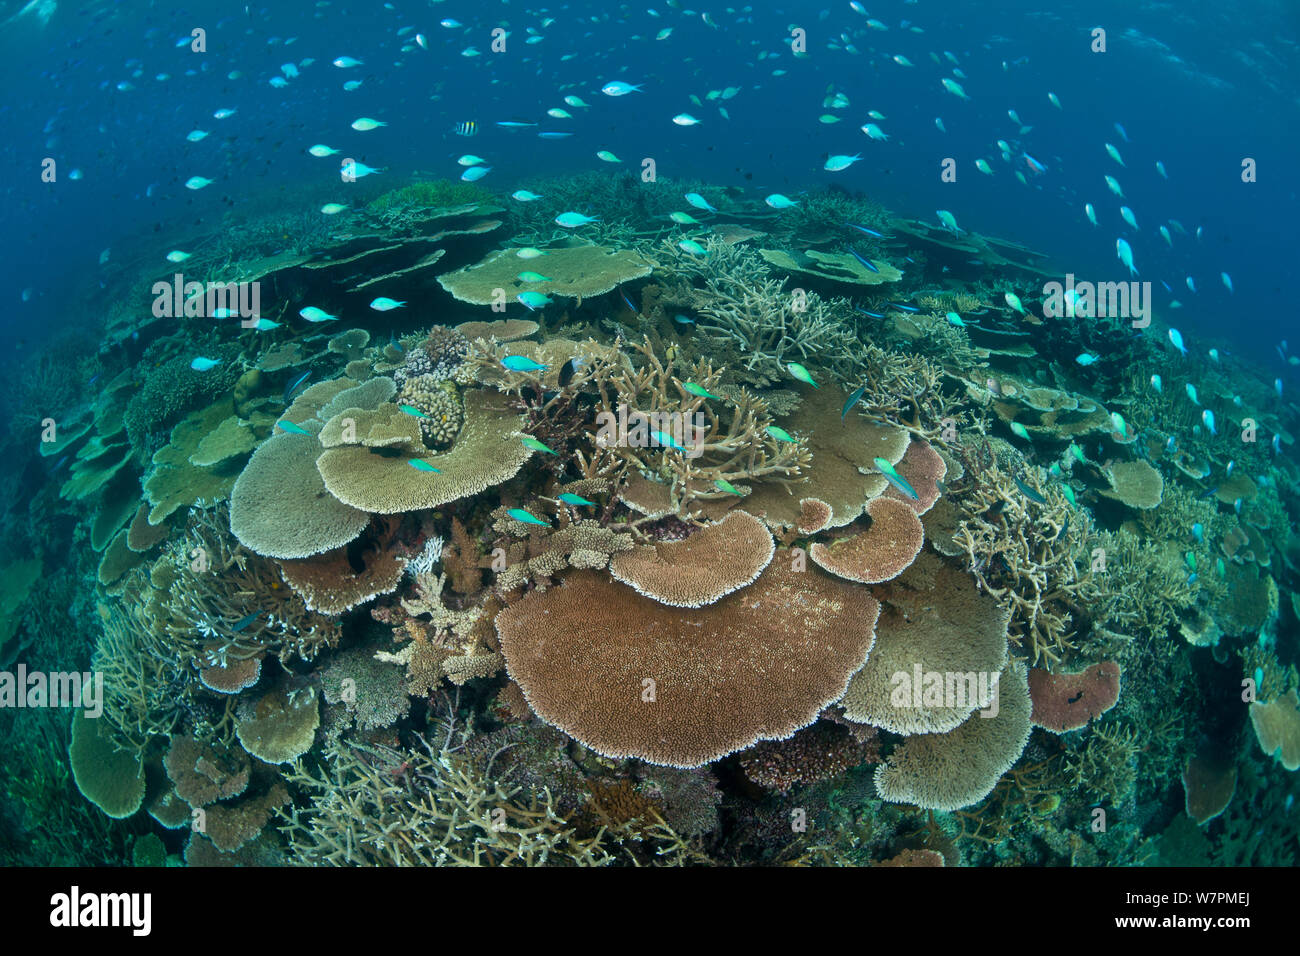 Acropora table and staghorn coral reef, with shoal of fish, Great Barrier  Reef, Australia Stock Photo - Alamy